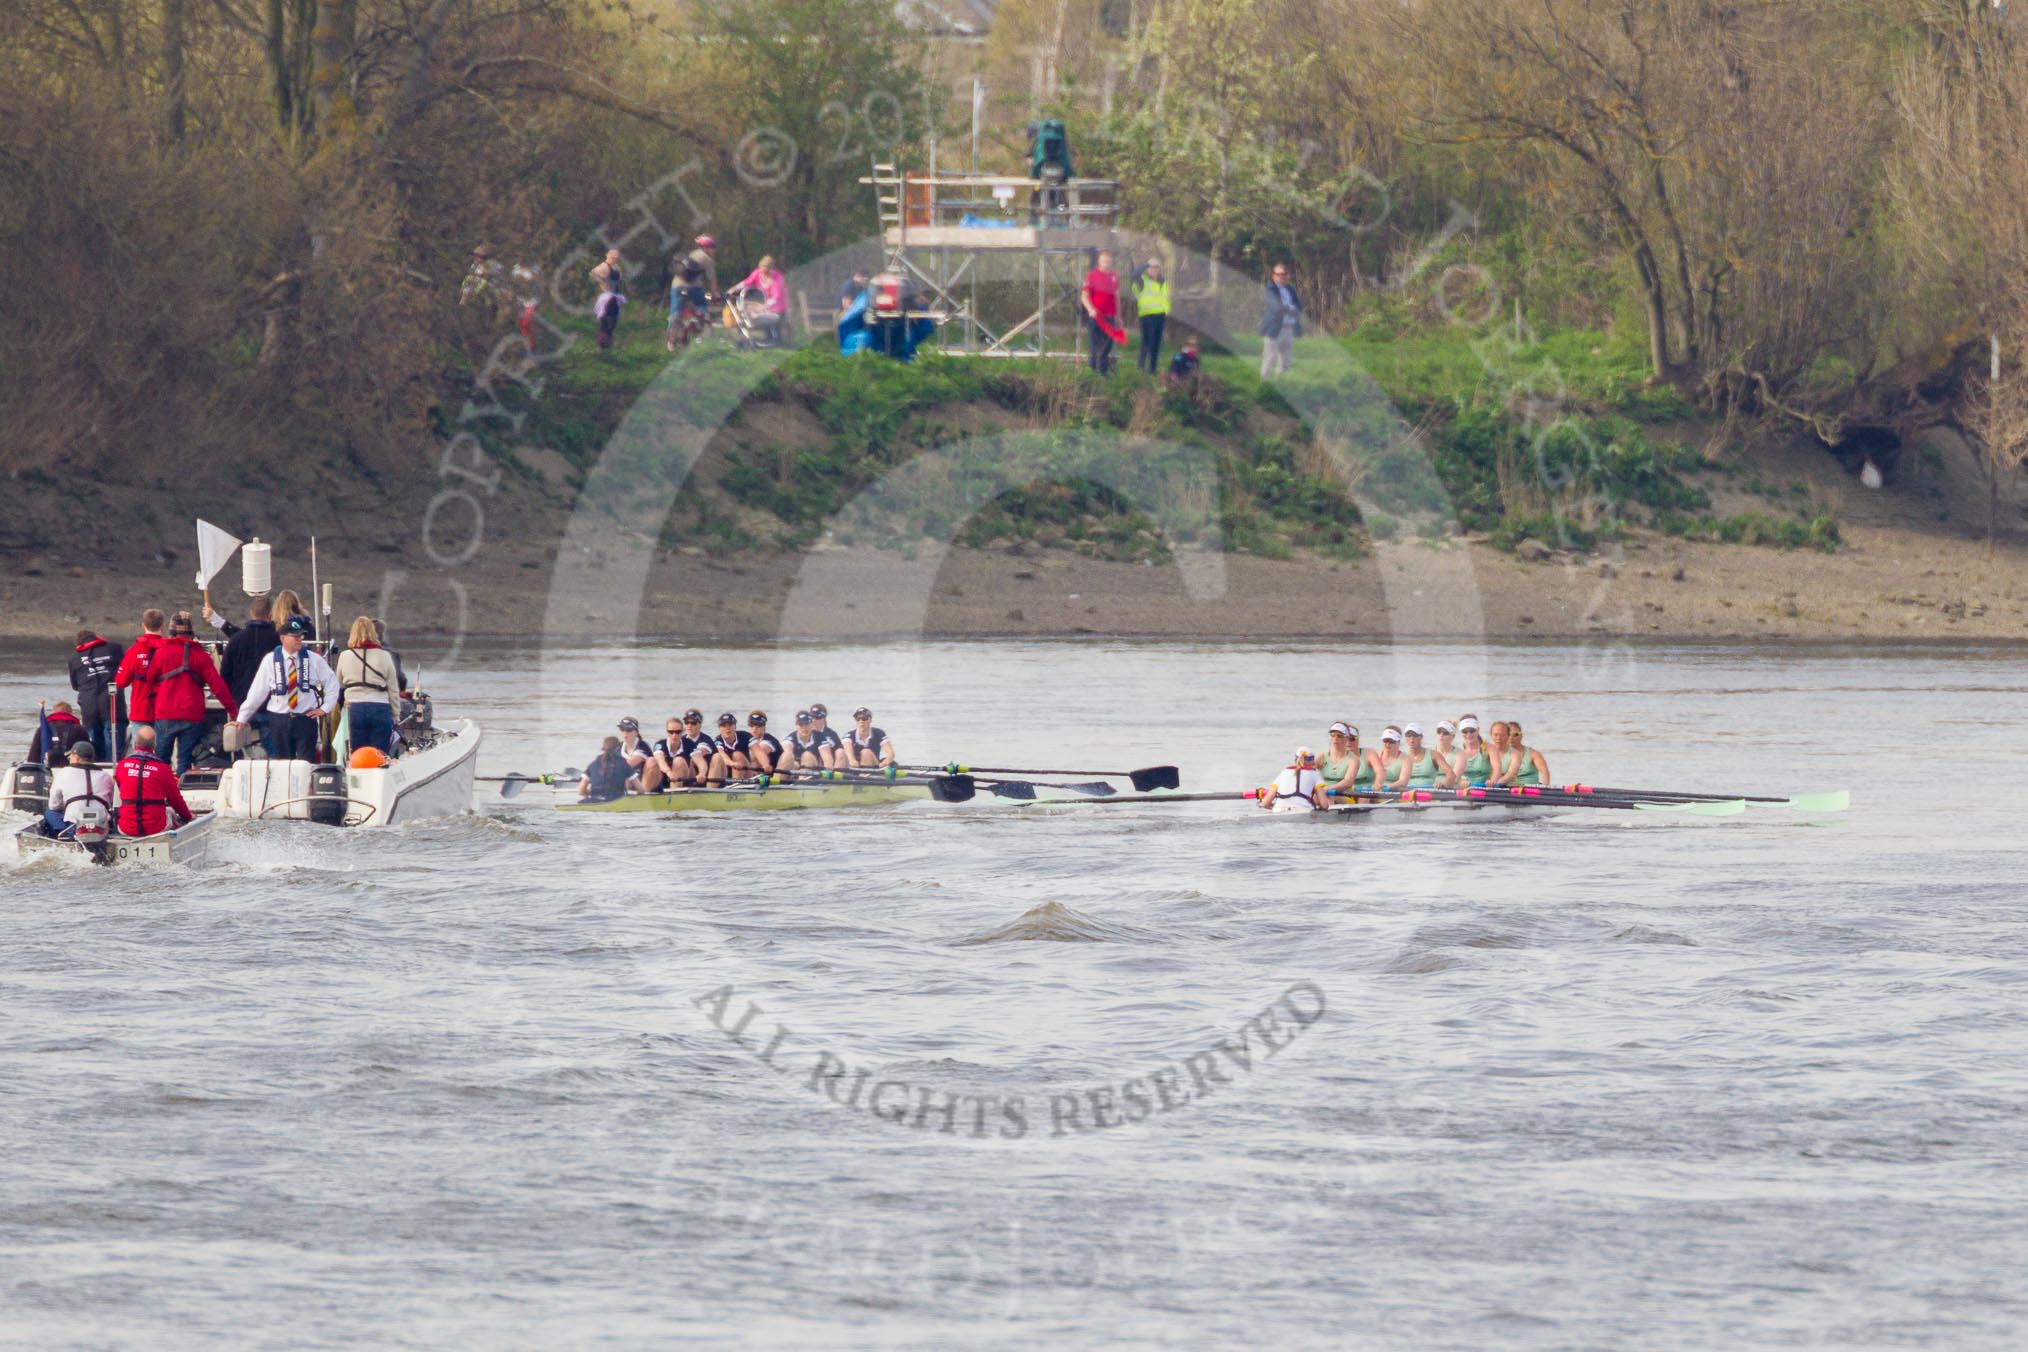 The Boat Race season 2015 - Newton Women's Boat Race.
River Thames between Putney and Mortlake,
London,

United Kingdom,
on 10 April 2015 at 16:04, image #151